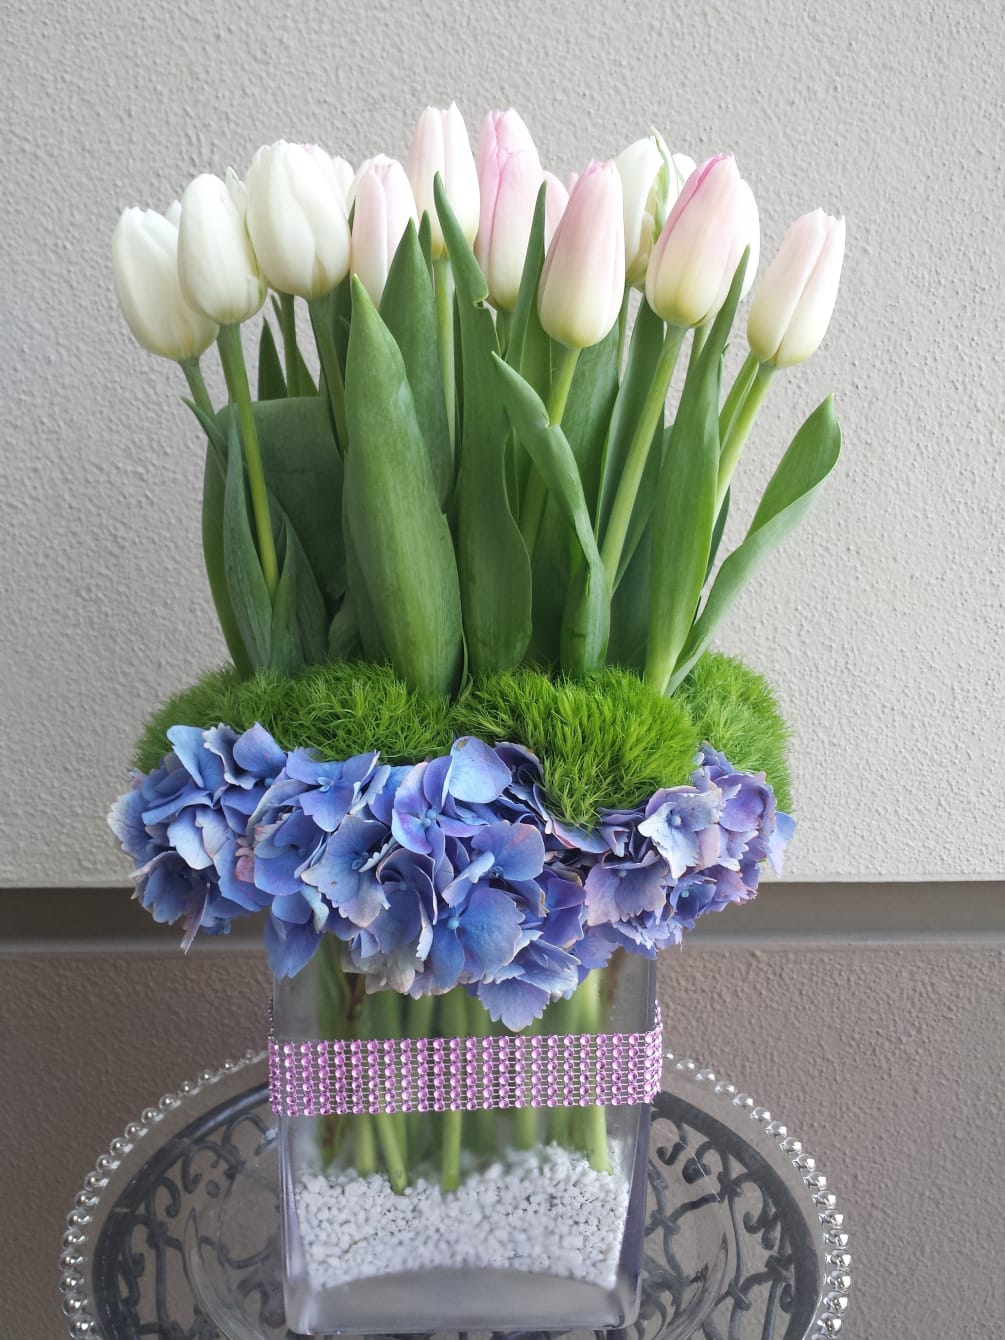 Dutch tulips designed in a fashionable arrangement.  Great for every day